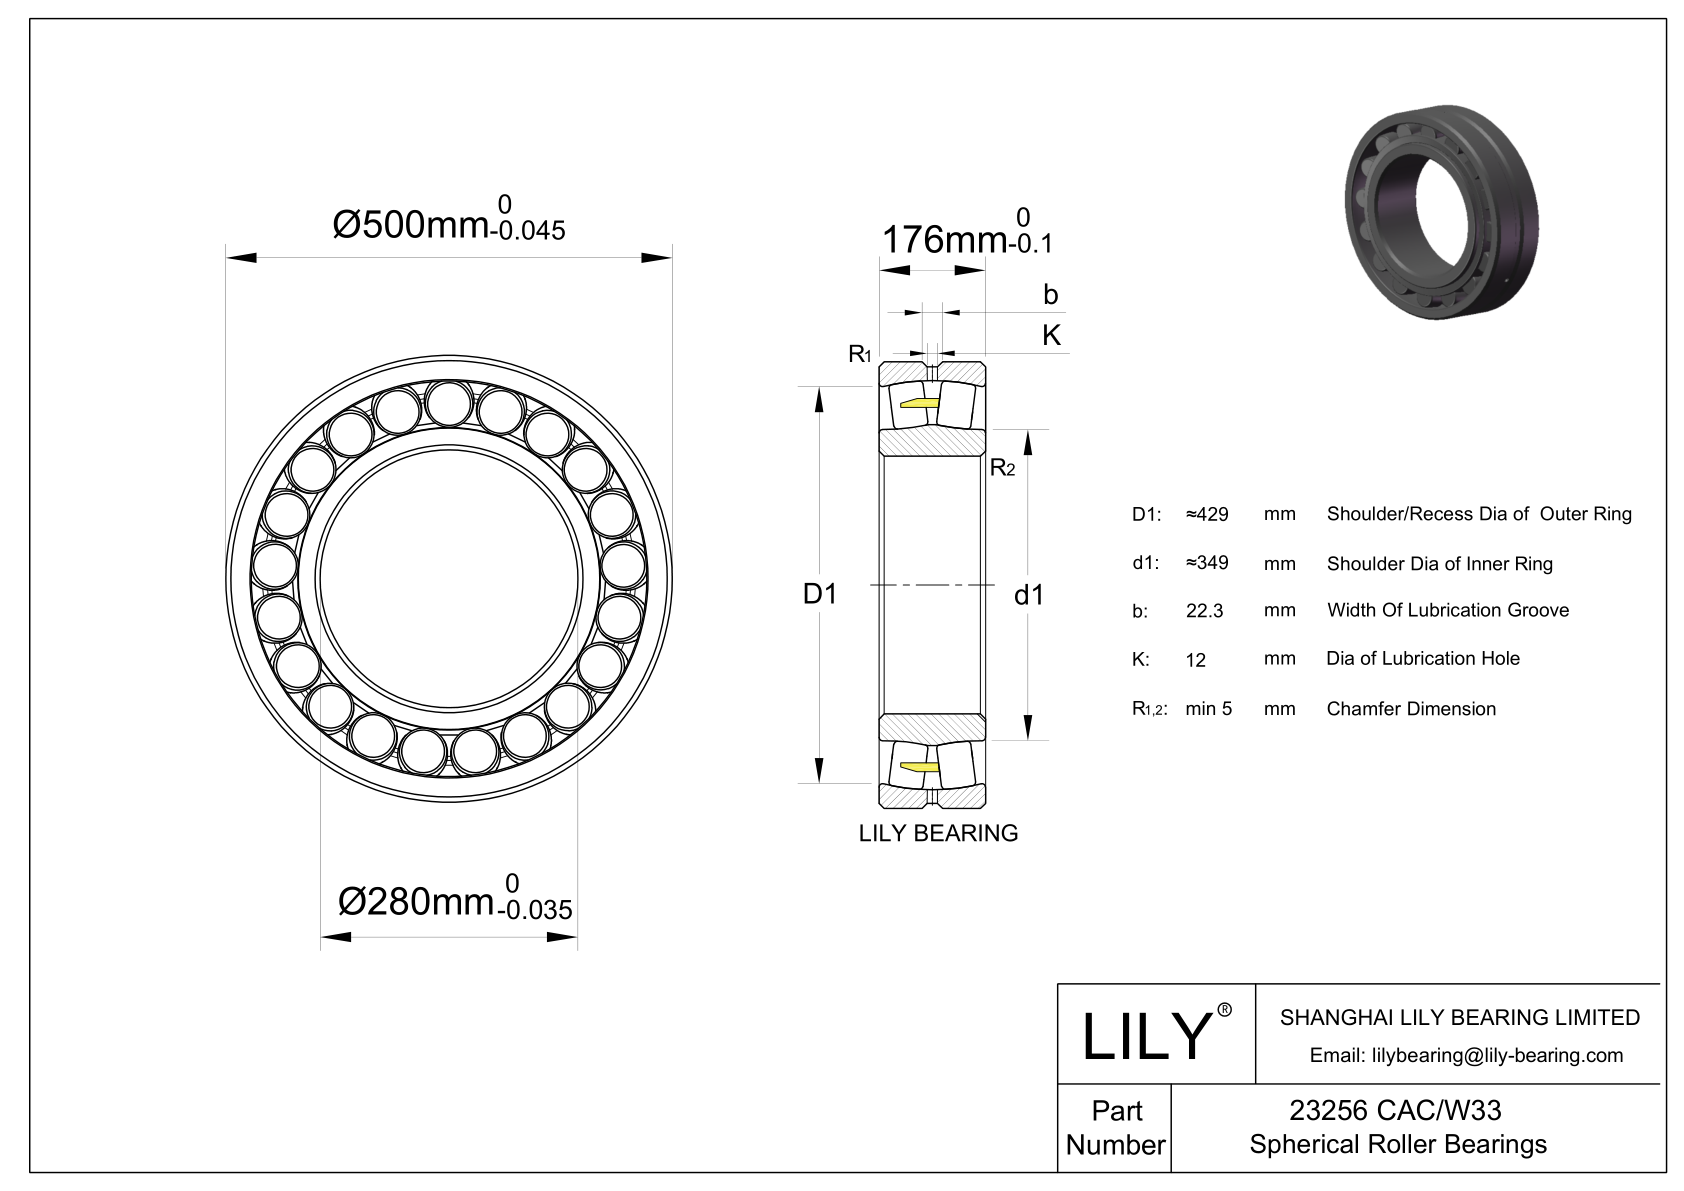 23256 CAC/W33 Double Row Spherical Roller Bearing cad drawing